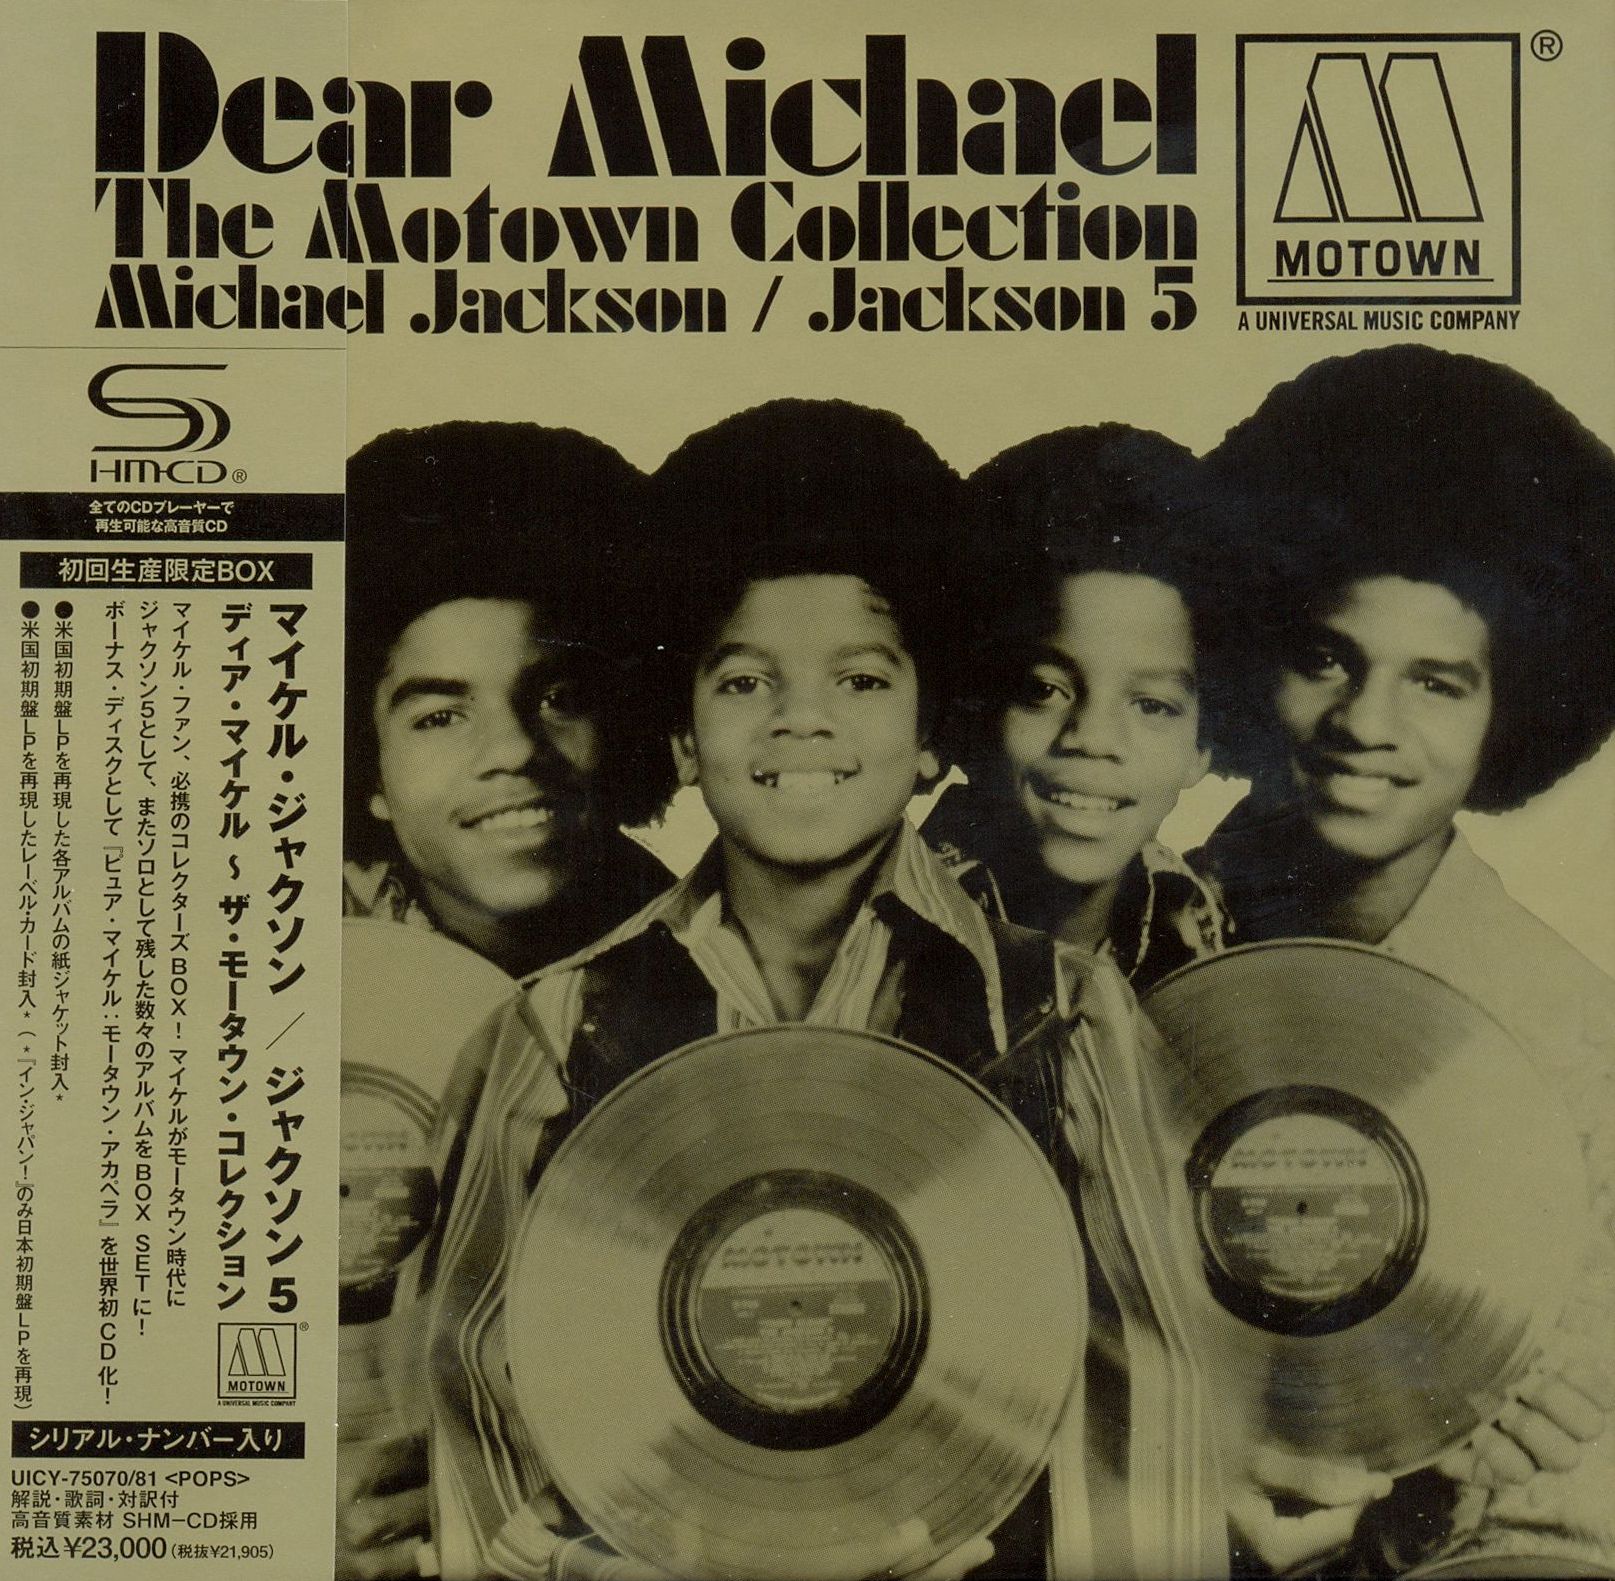 Release “Dear Michael: The Motown Collection” by Michael Jackson